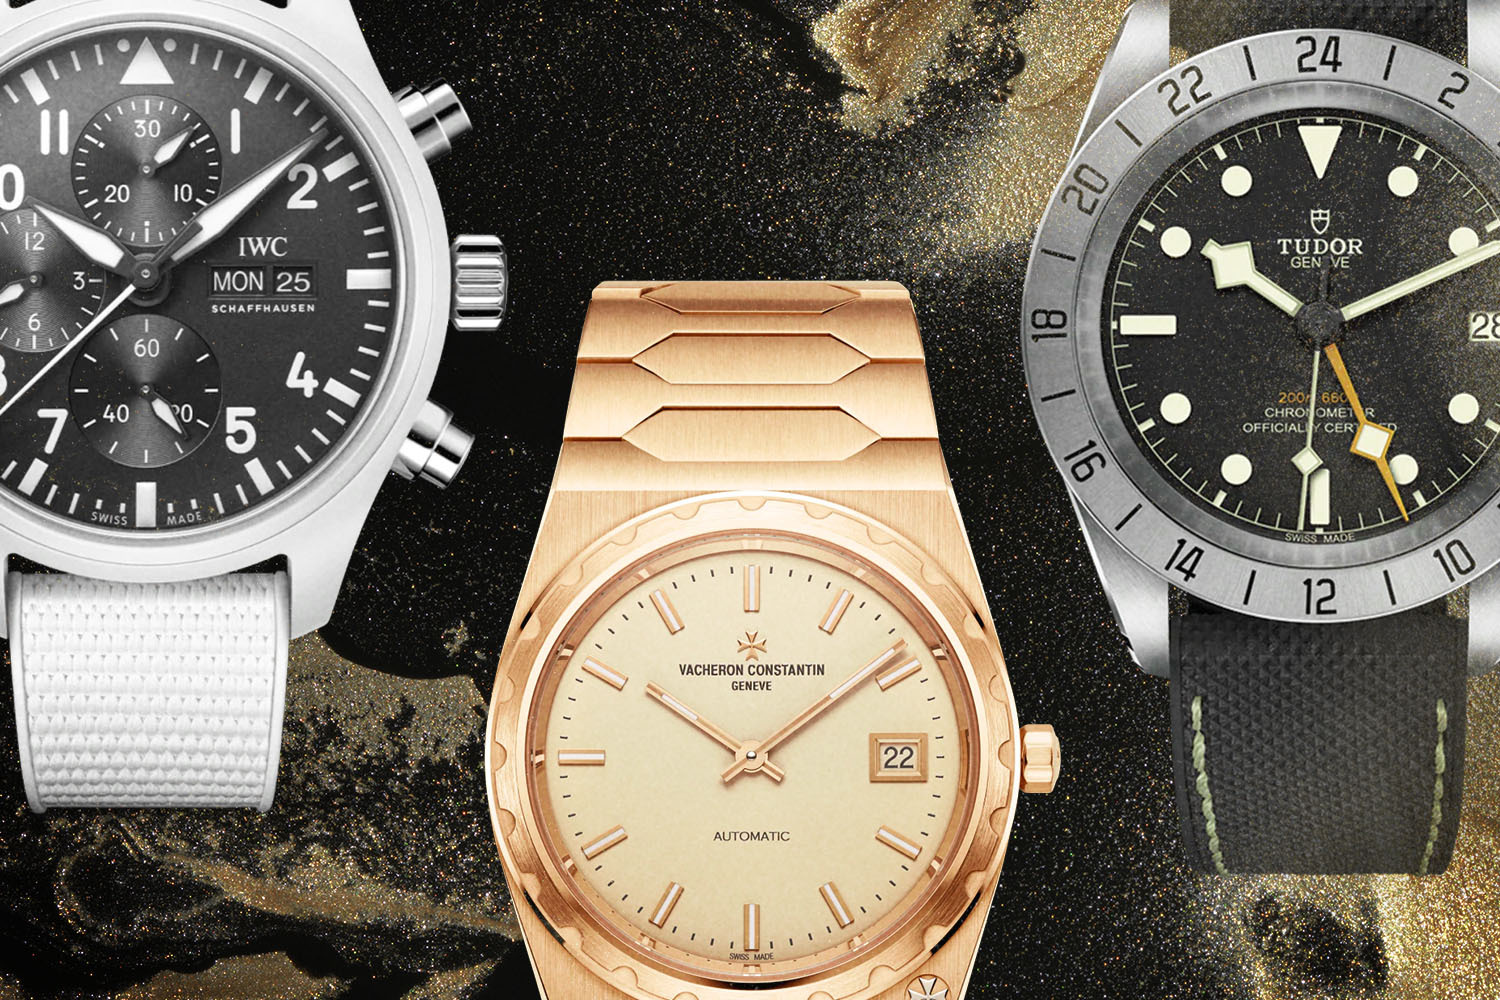 Our top picks of Watches and Wonders 2022